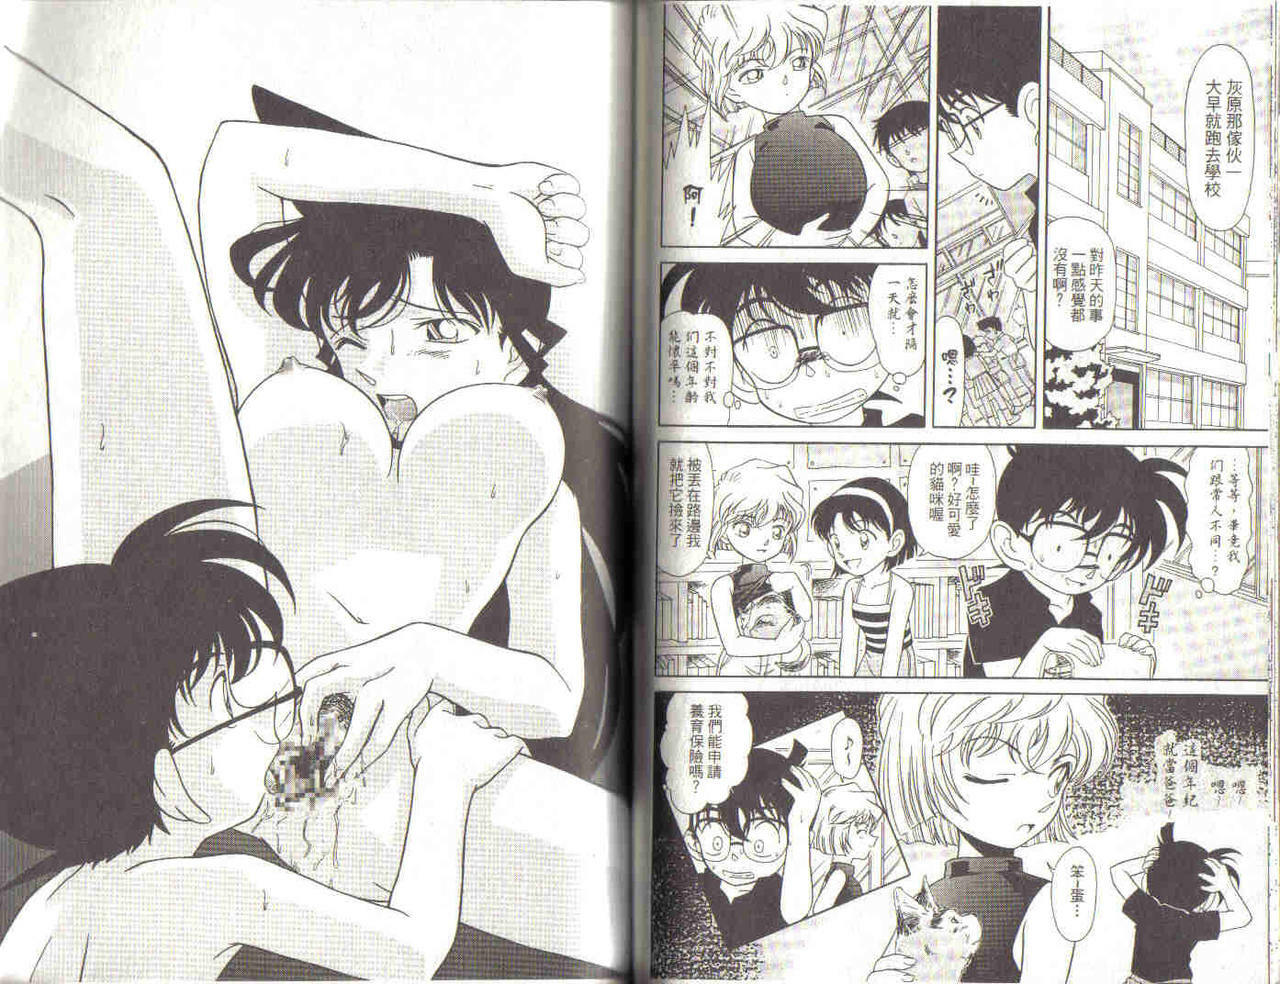 [Ooya Nako] Detective Assistant Vol. 3 (Detective Conan) [Chinese] page 49 full